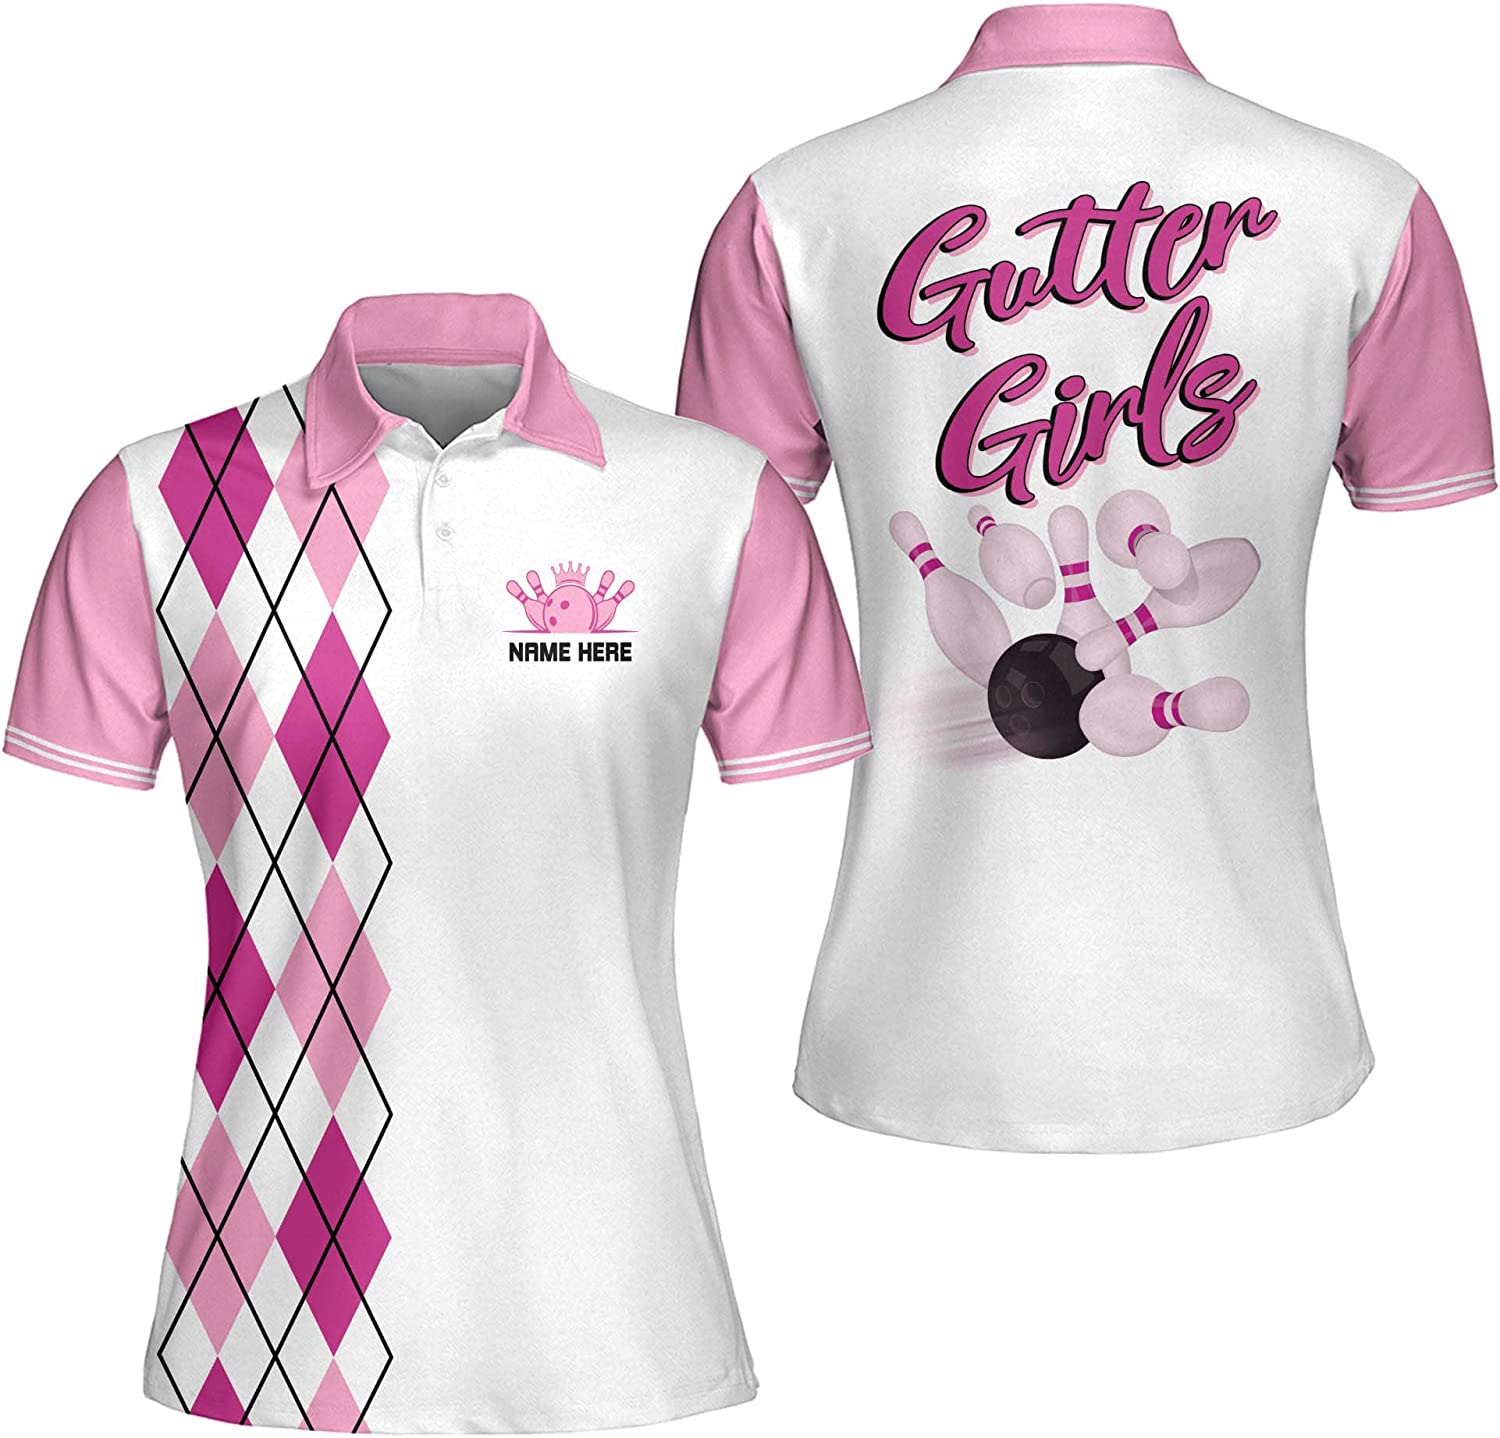 Customized Women’s Pink Bowling Shirts with 3D Designs for a Fun Look – PW-023